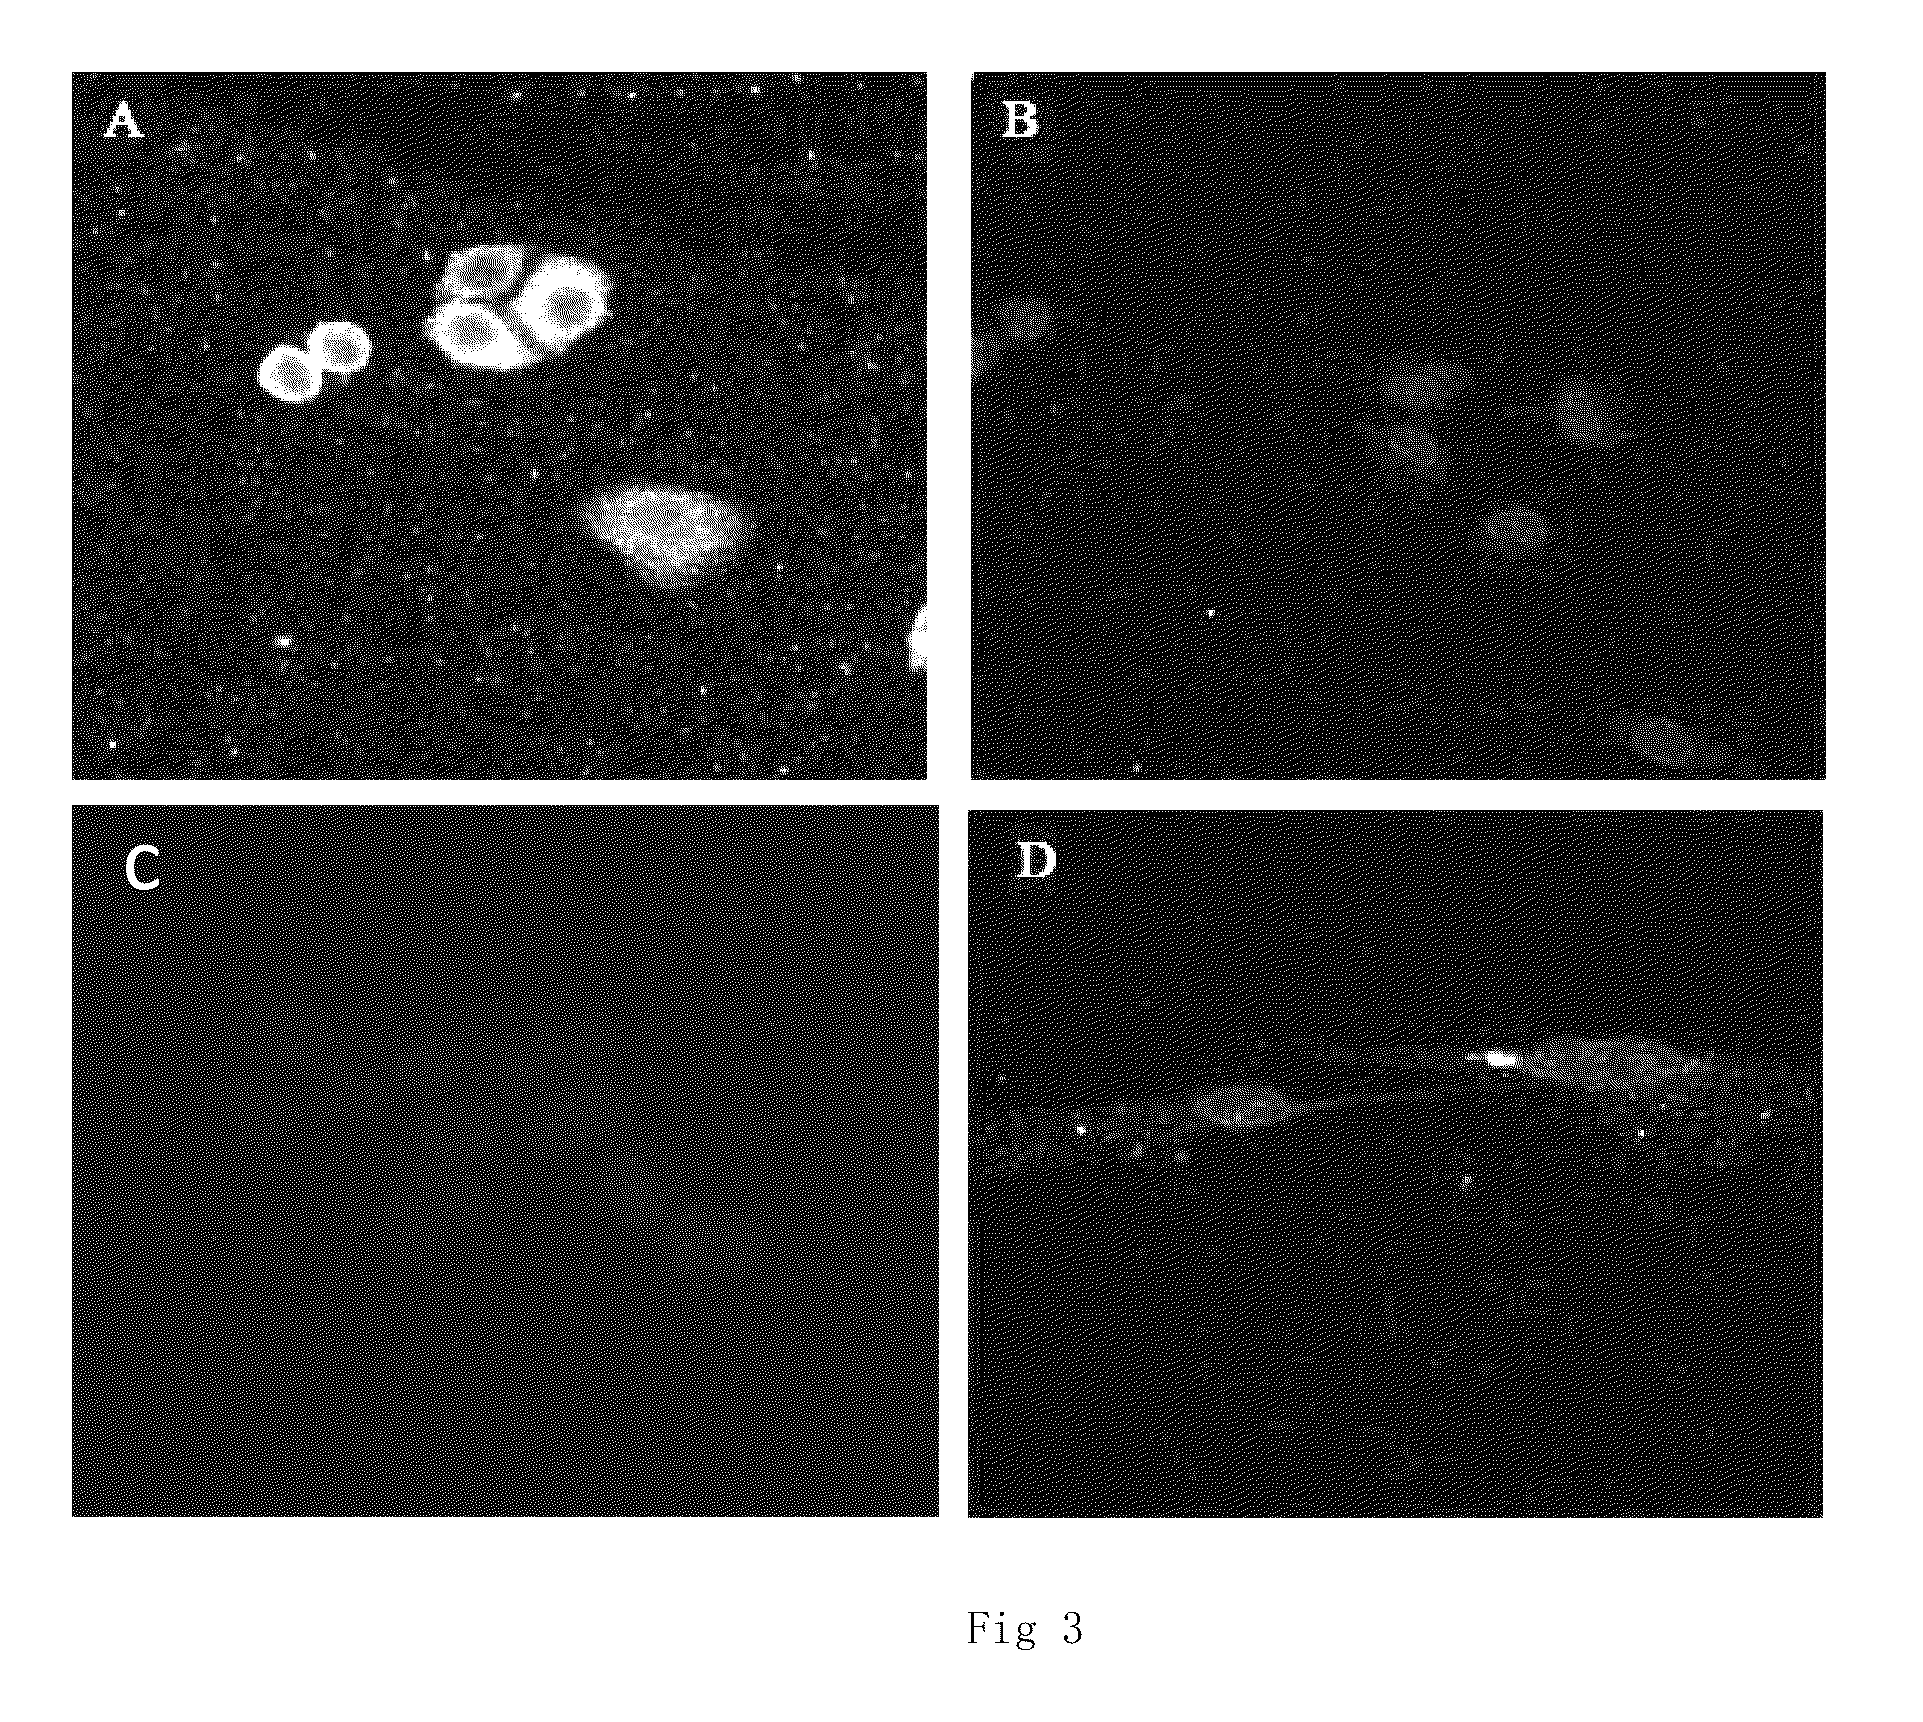 Monoclonal antibody against human non-small cell lung carcinoma and use thereof